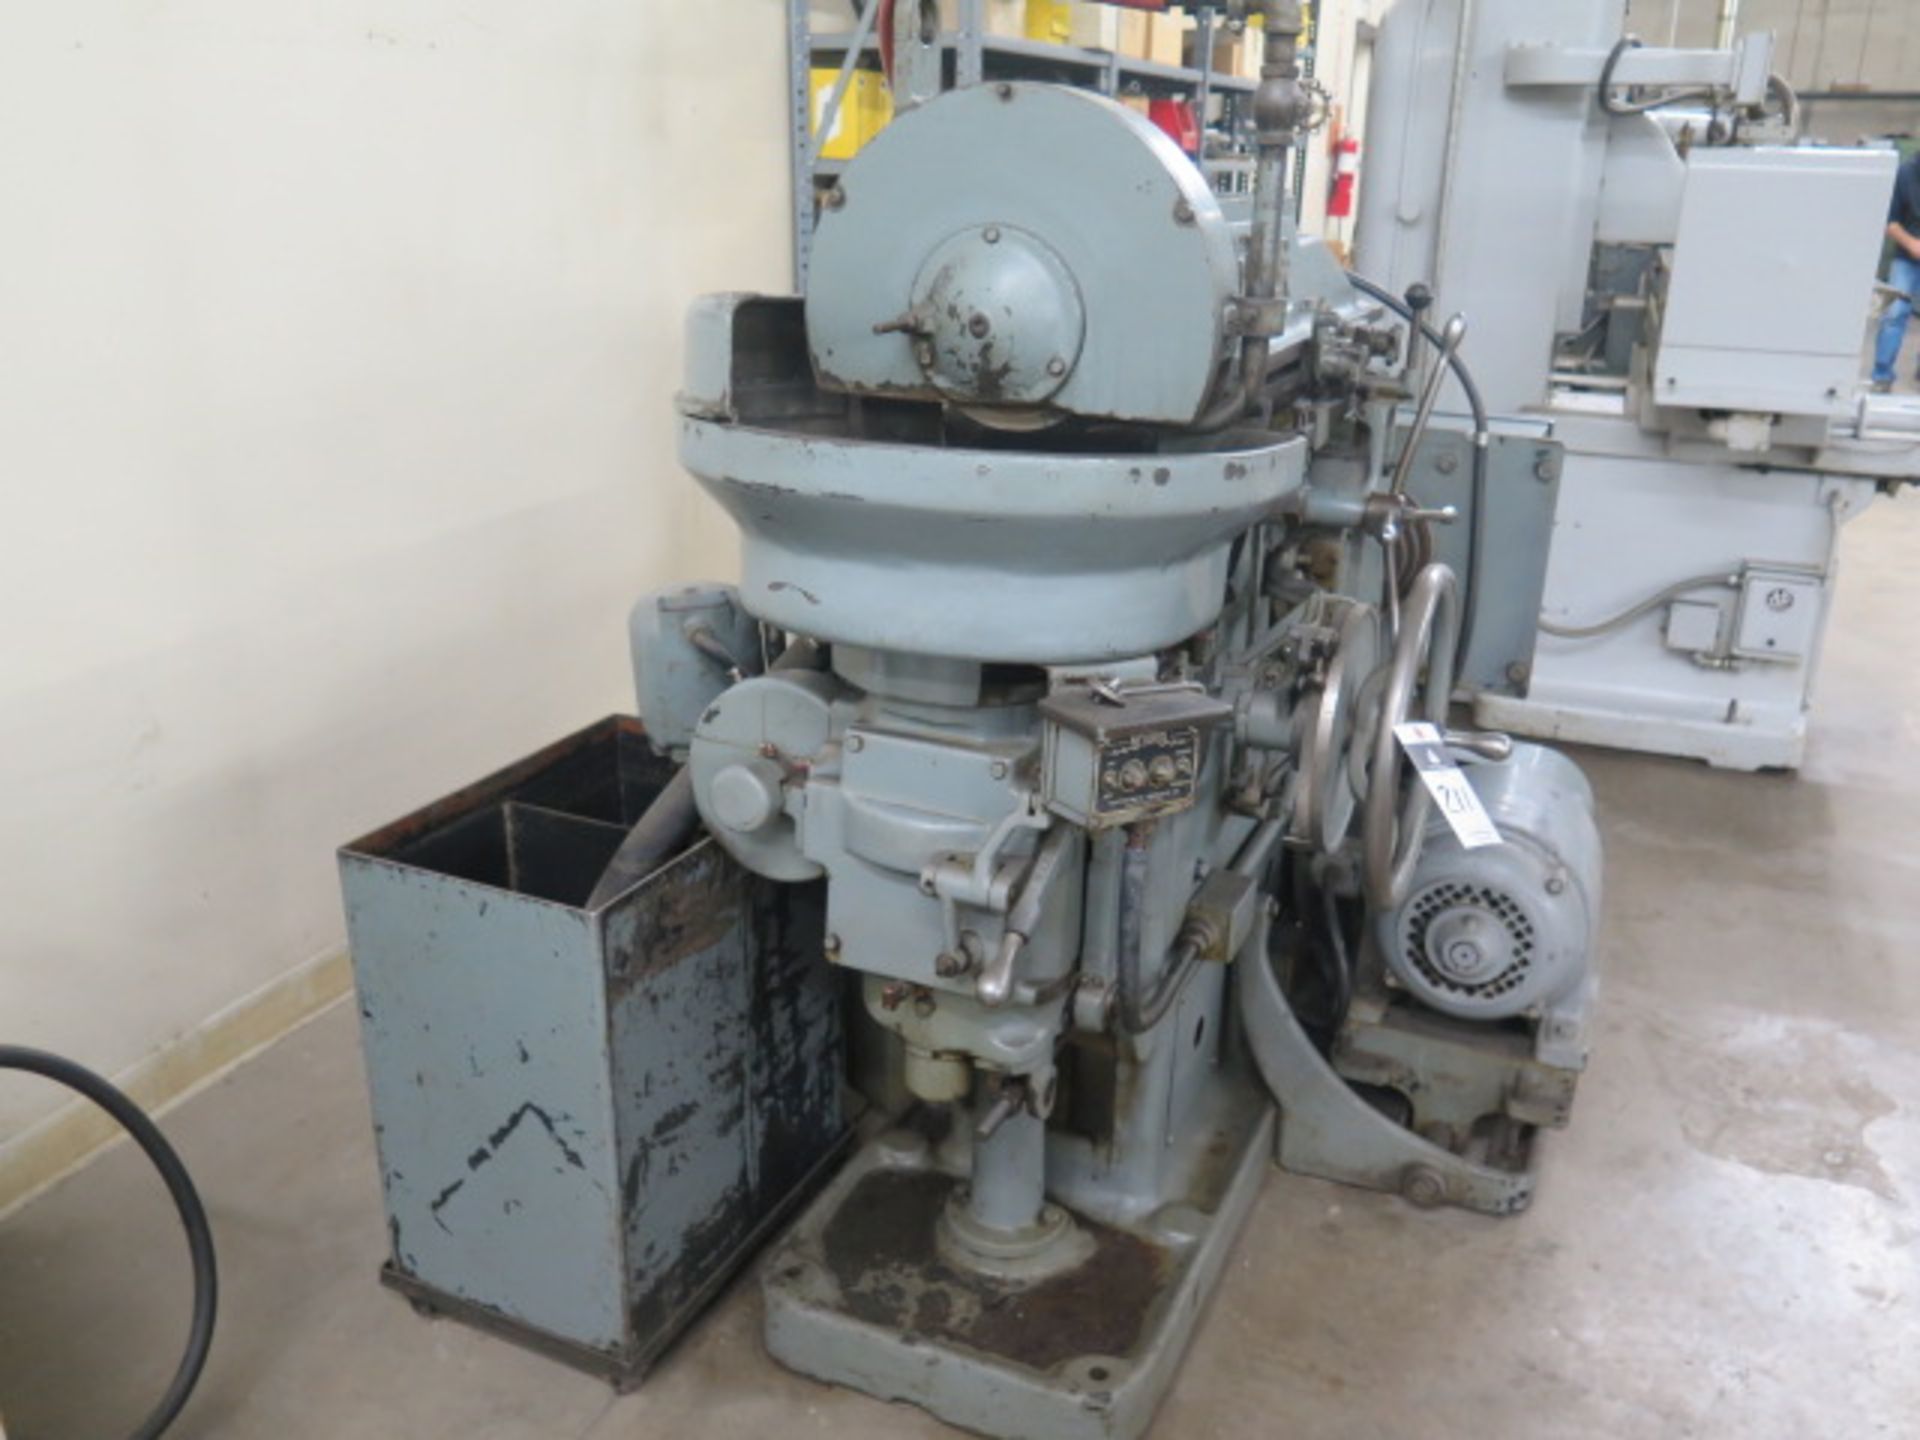 Arter mdl. A-1-8 8” Rotary Surface Grinder s/n 3042 w/ 8” Electromagnetic Rotary Chuck, Auto Feeds - Image 2 of 9